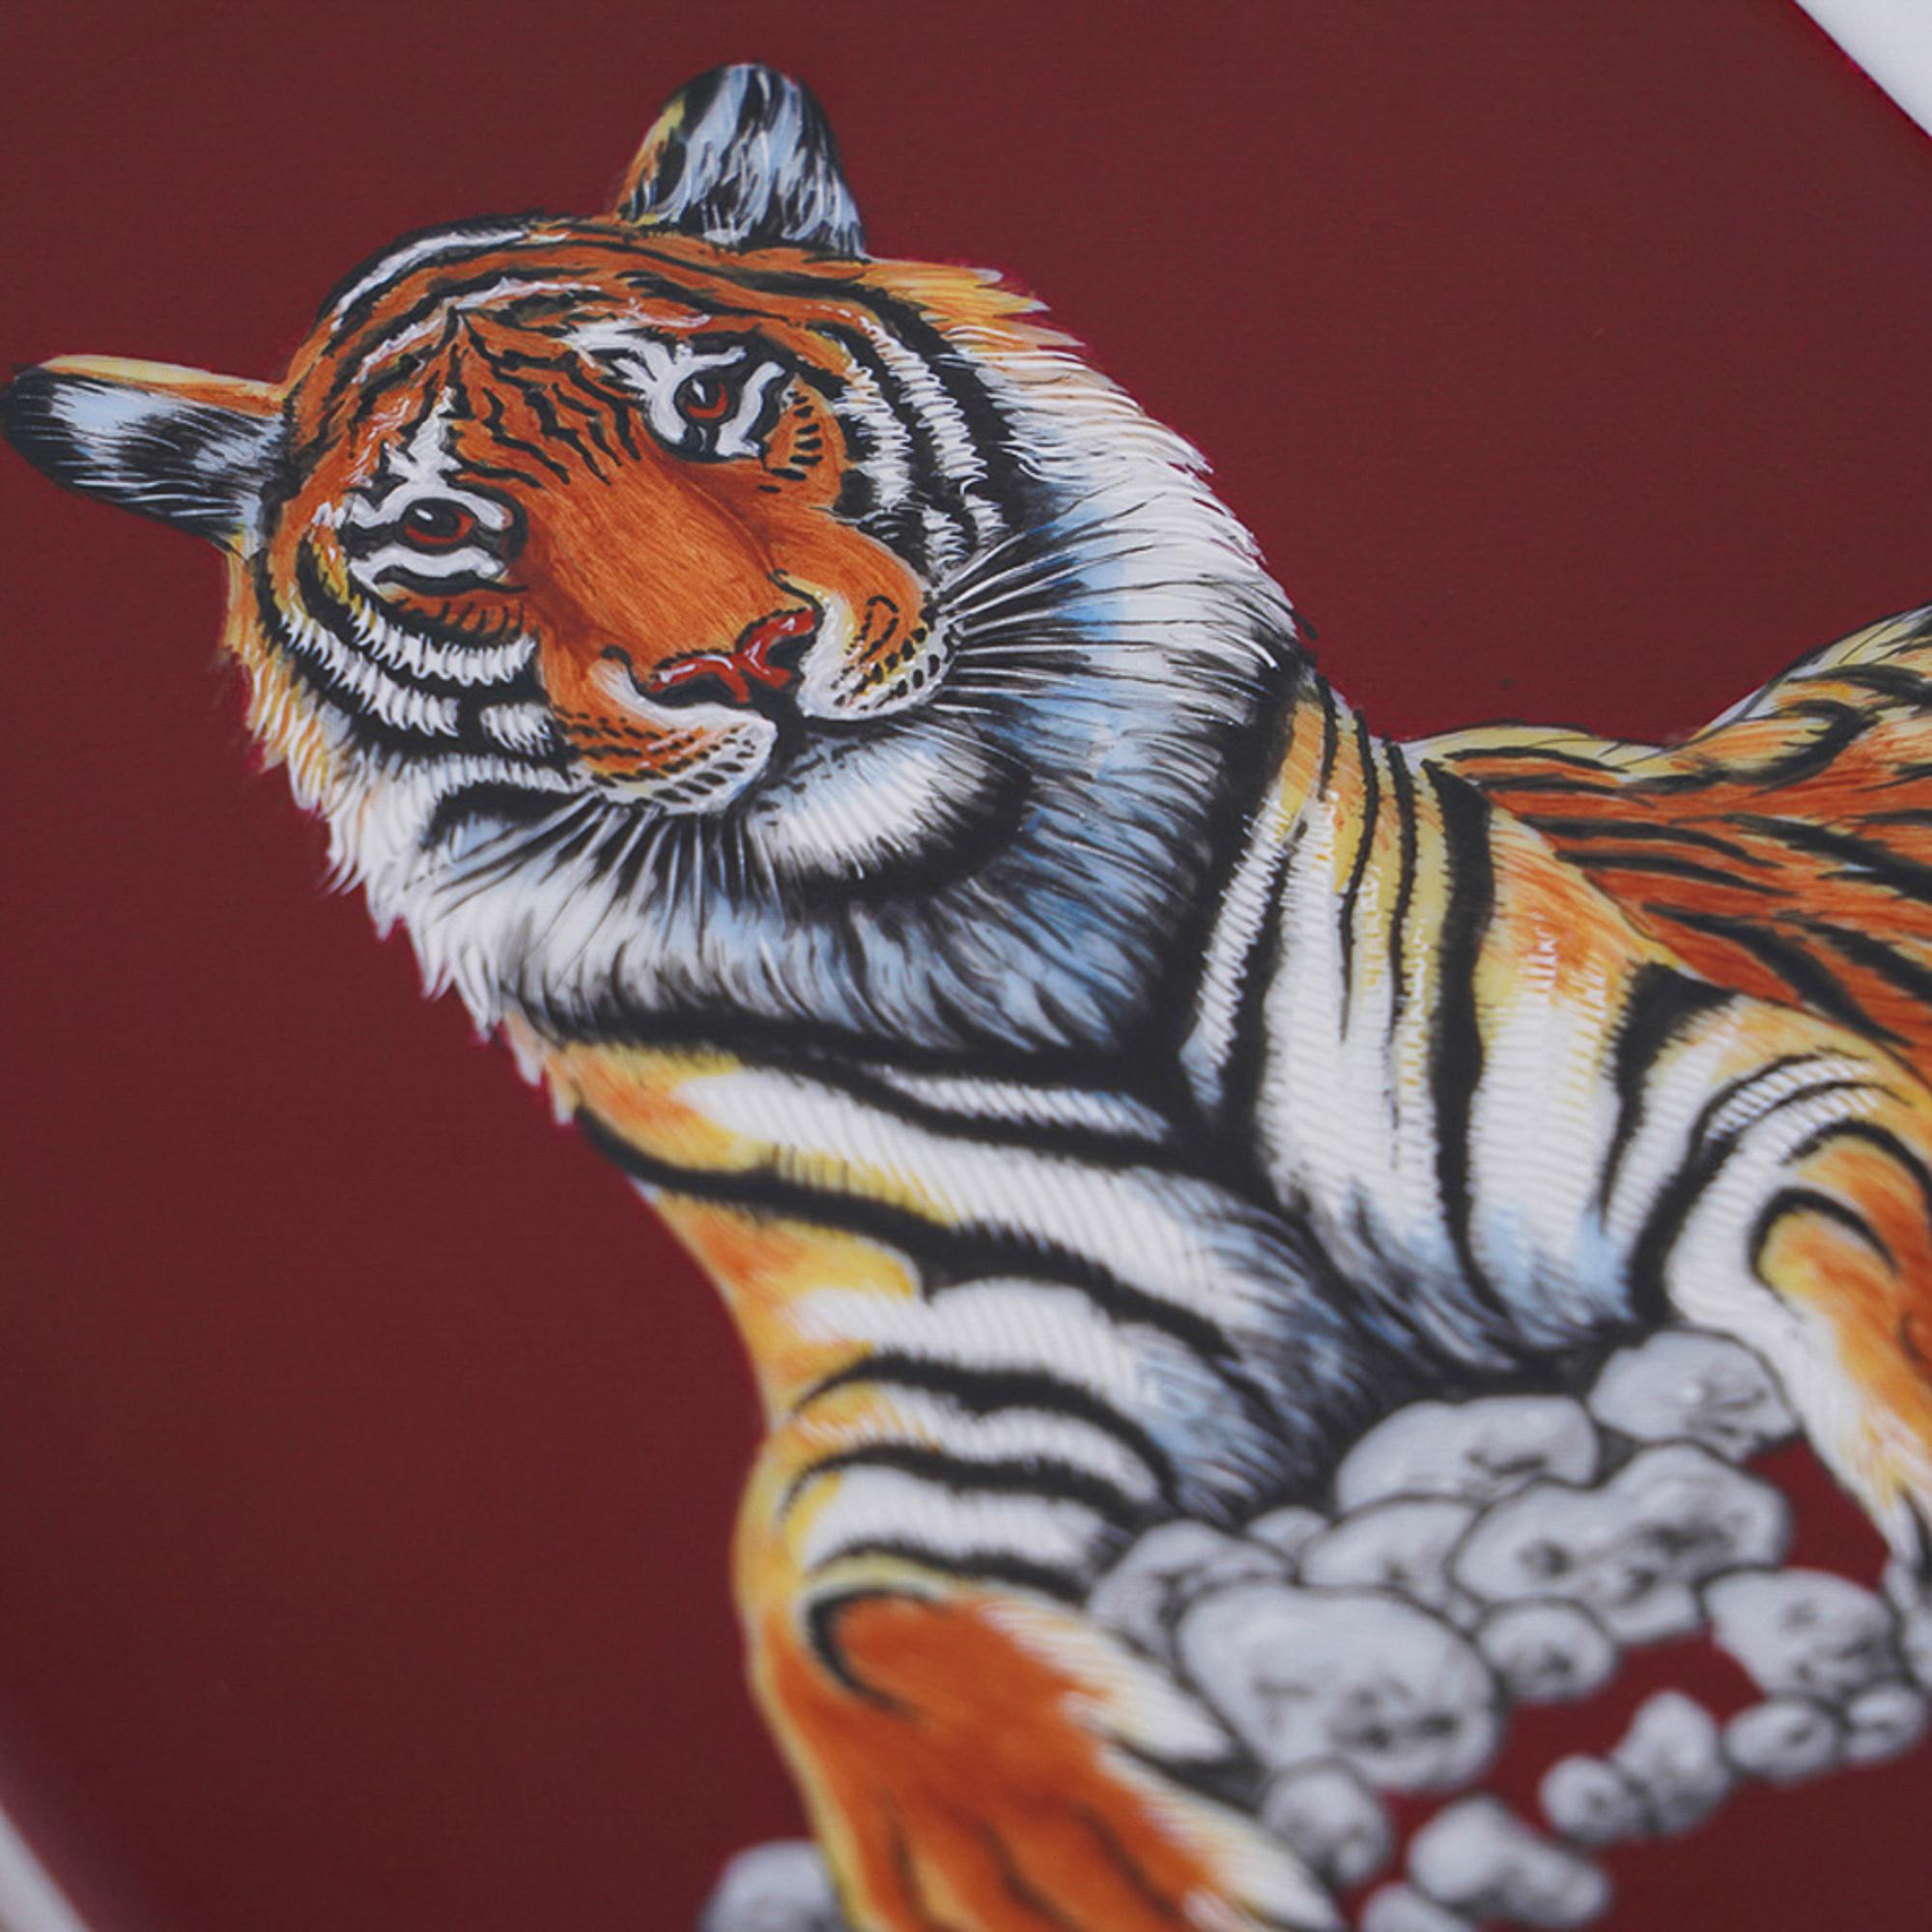 Mightychic offers a guaranteed authentic Hermes Tigre Royal featured in Gold (Or) and Red (Rouge) change tray.
Hand-painted Limoges Porcelain.
This magnificent regal tiger is a collectors treasure.
A decorative ashtray or tray piece perfect for any